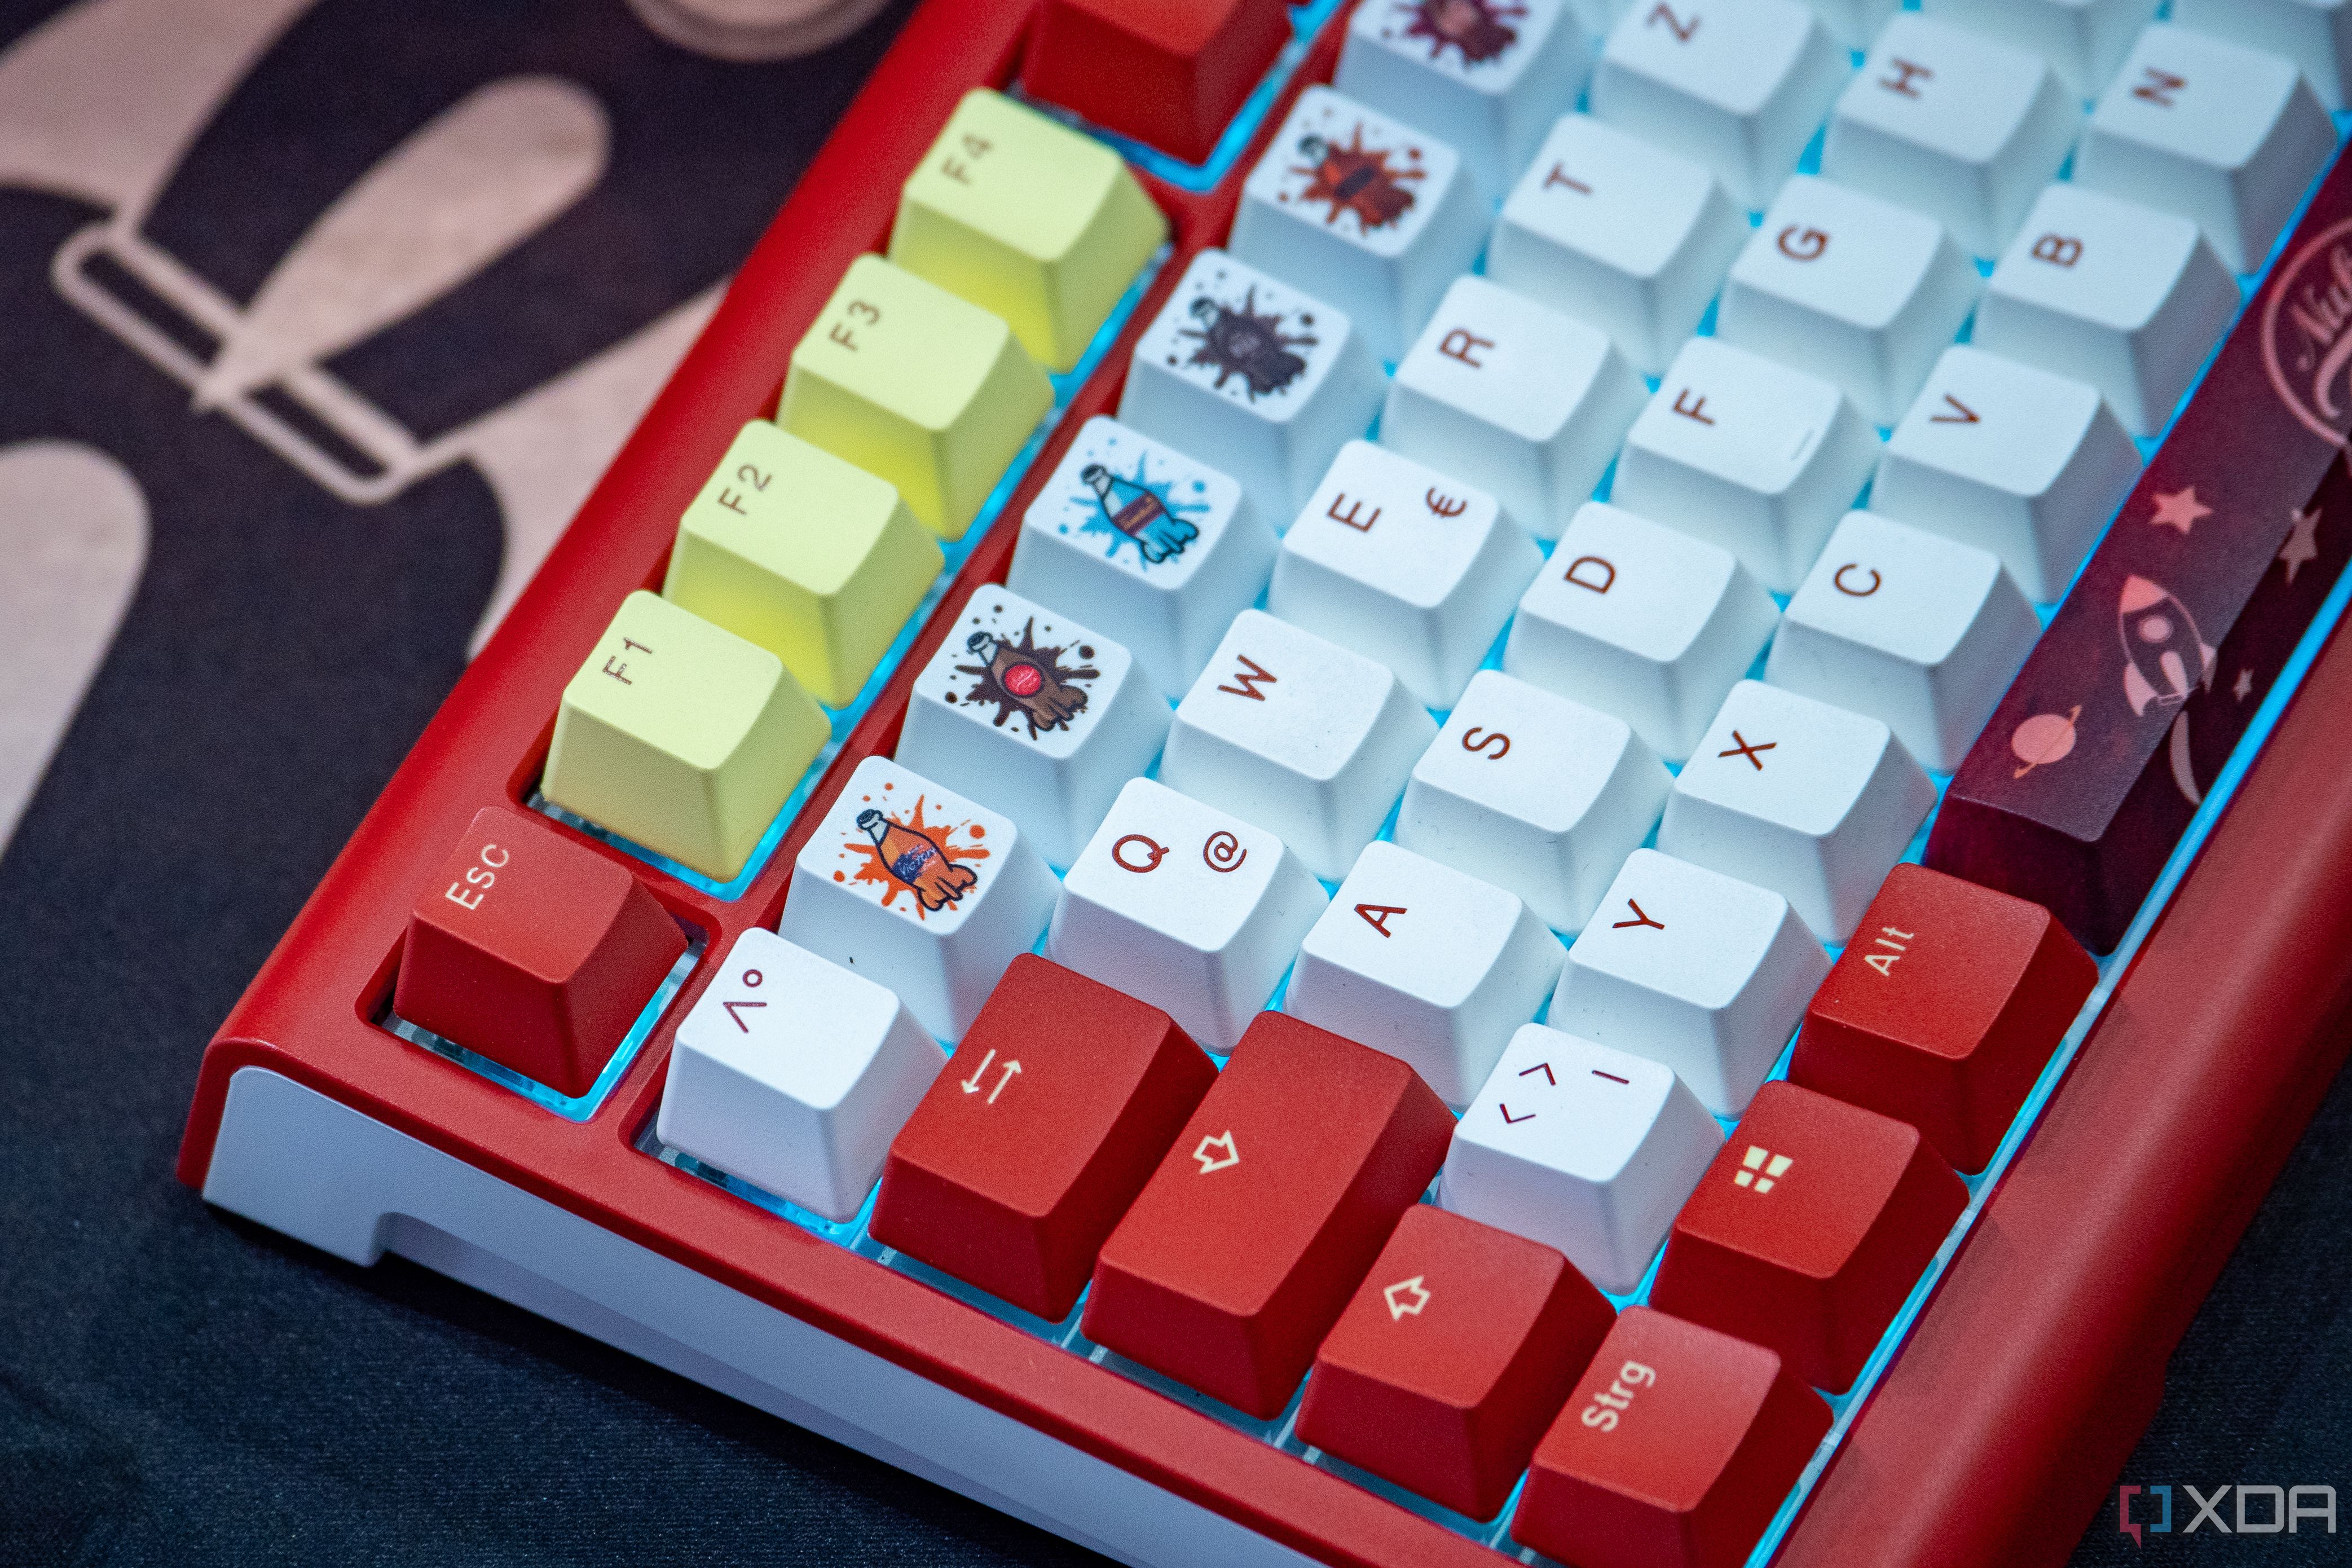 Ducky Nuka Cola Fallout keycaps